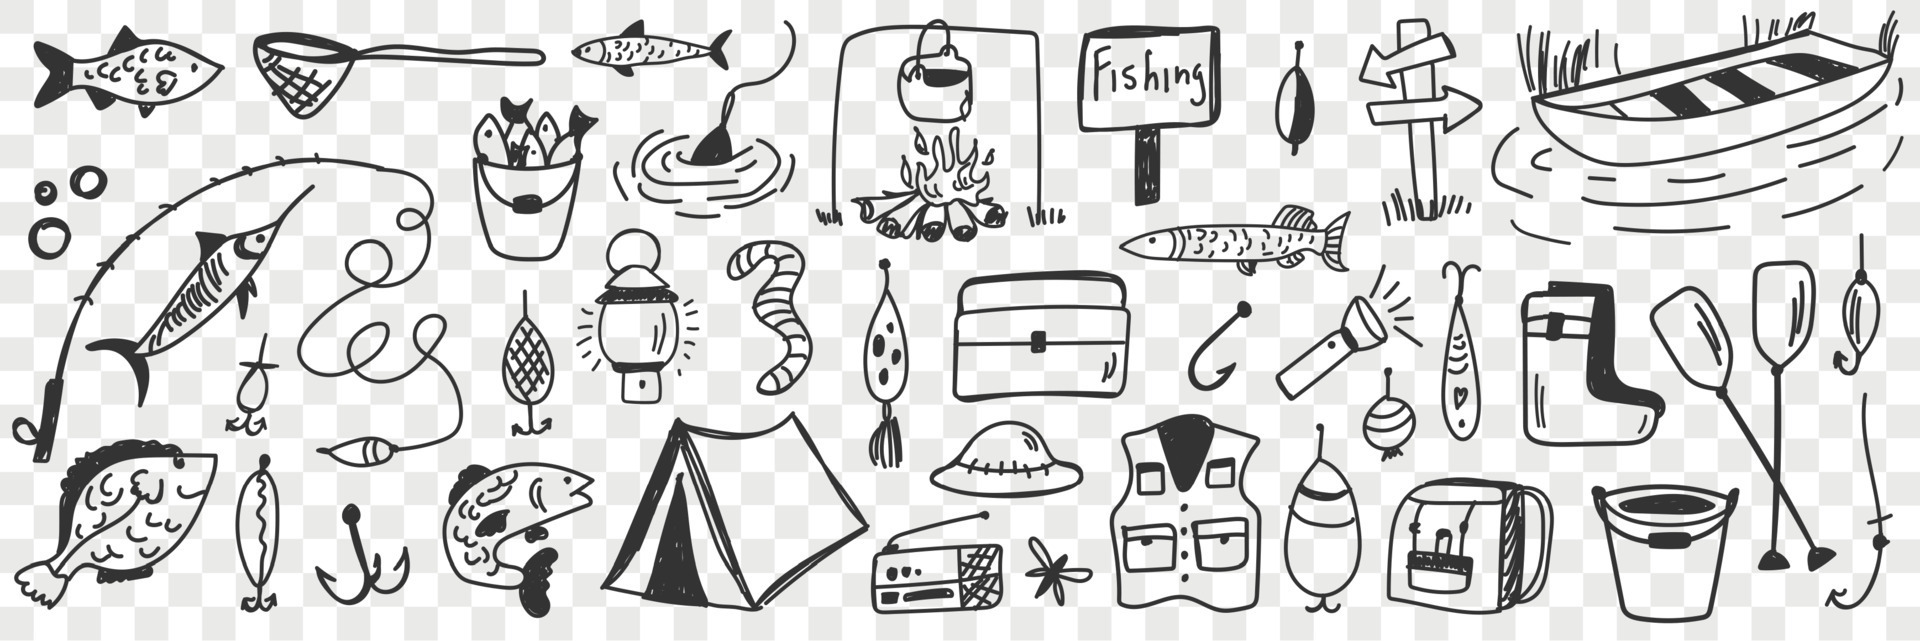 https://static.vecteezy.com/system/resources/previews/021/937/546/original/fishing-tools-and-accessories-doodle-set-collection-of-hand-drawn-hooks-camping-worm-clothing-bucket-fishes-bonfire-lamp-for-fishing-on-nature-hobby-leisure-active-rest-on-transparent-background-free-vector.jpg